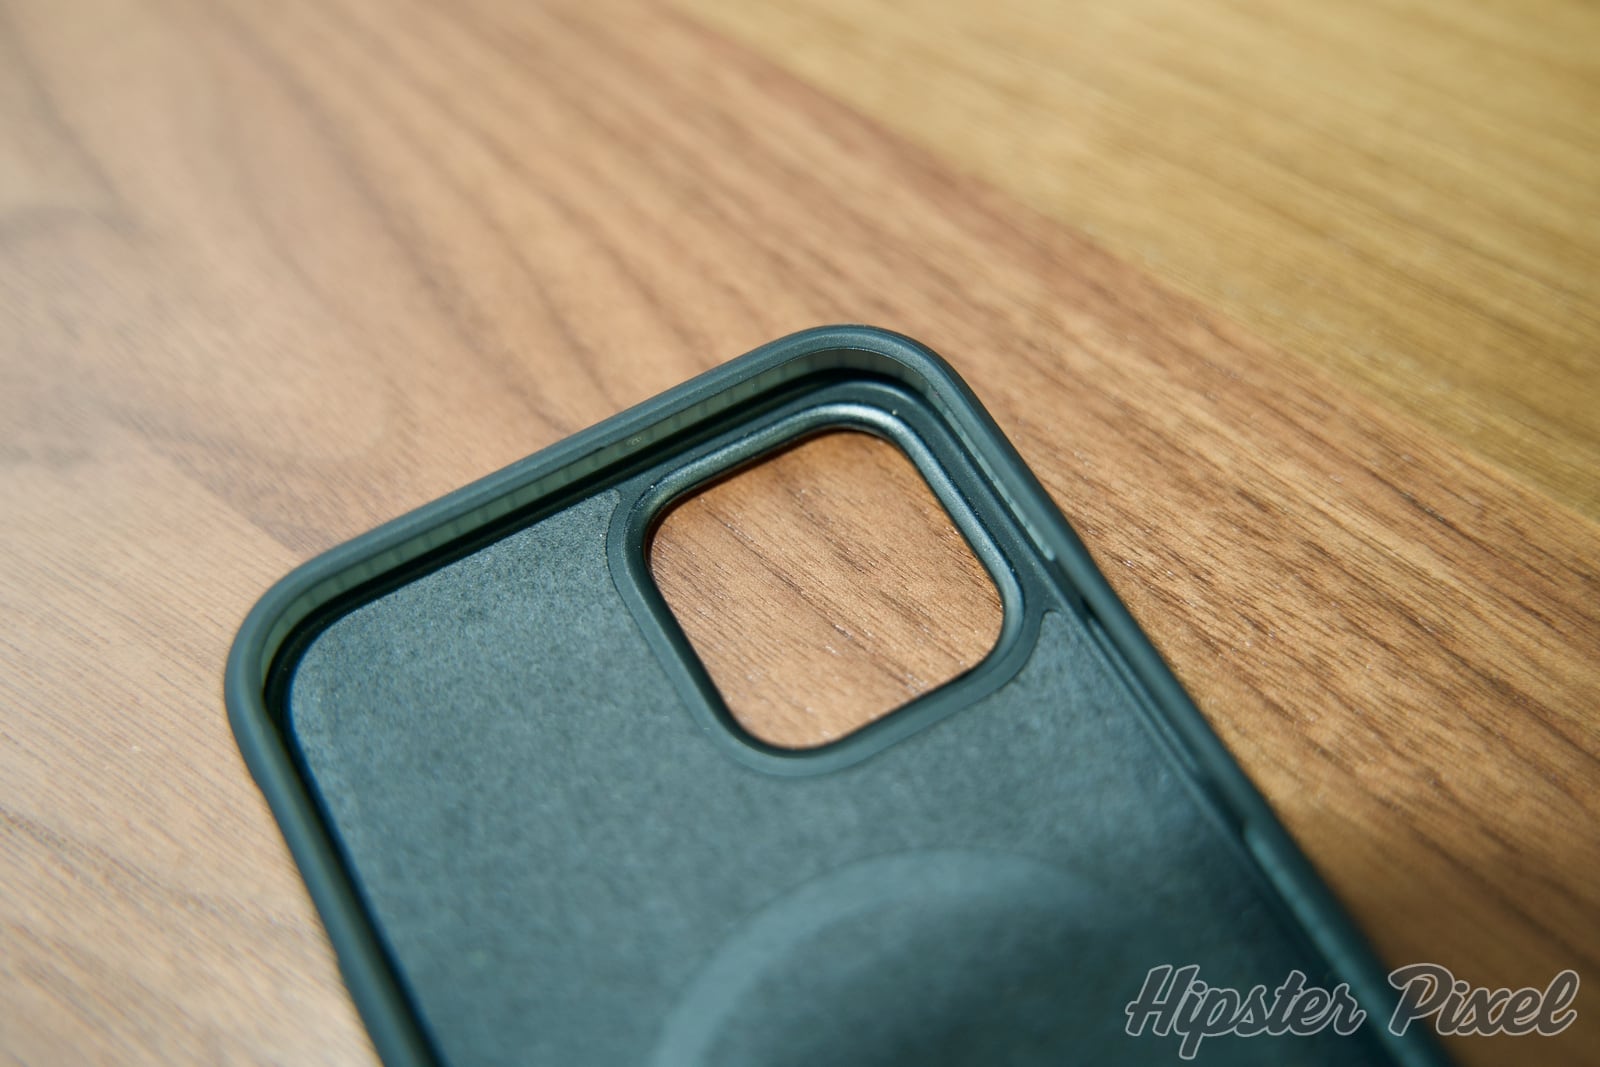 Nomad iPhone 12 Pro Rugged Case [Review]